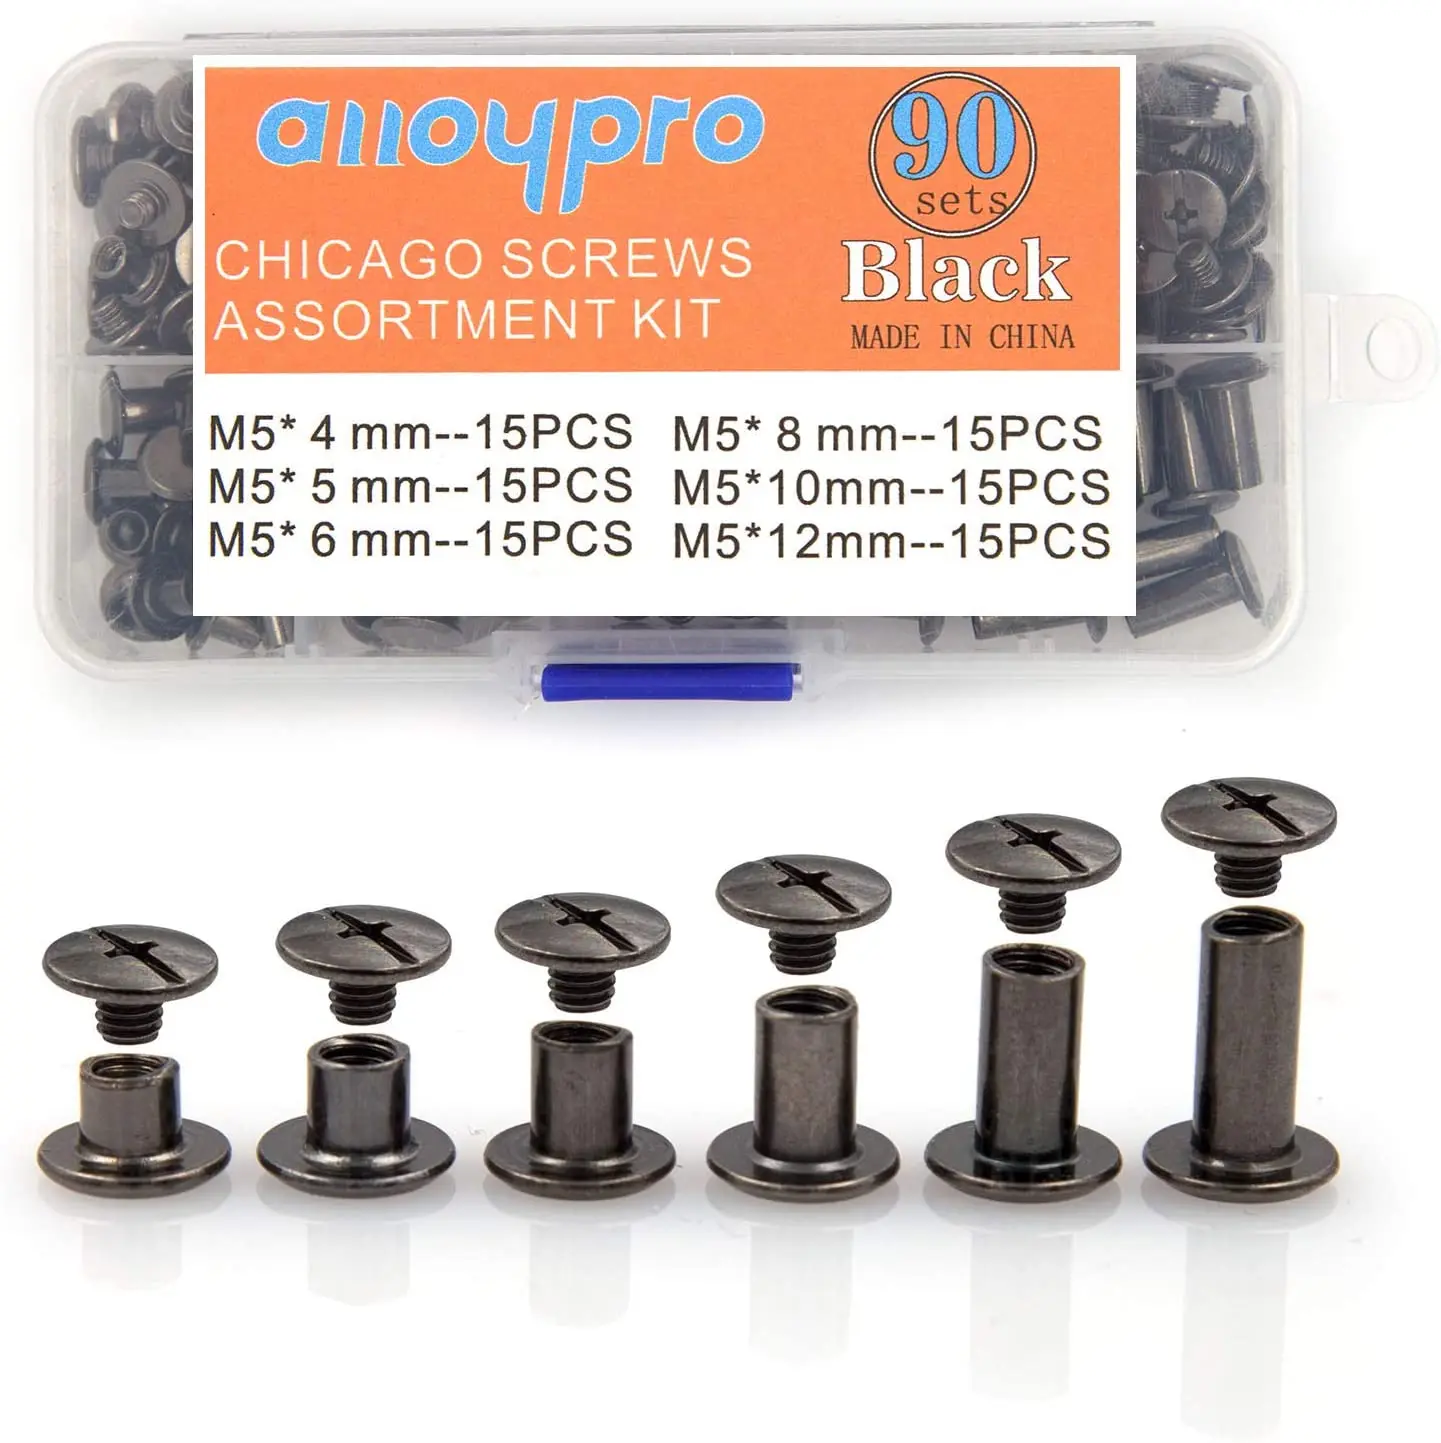 M5 X 4, 5, 6, 8, 10, 12 Bronze 6 Sizes of Round Flat Head Leather Rivets Metal Screw Studs for DIY Leather Craft and Bookbinding 90 Sets Chicago Screws Assorted Kit 